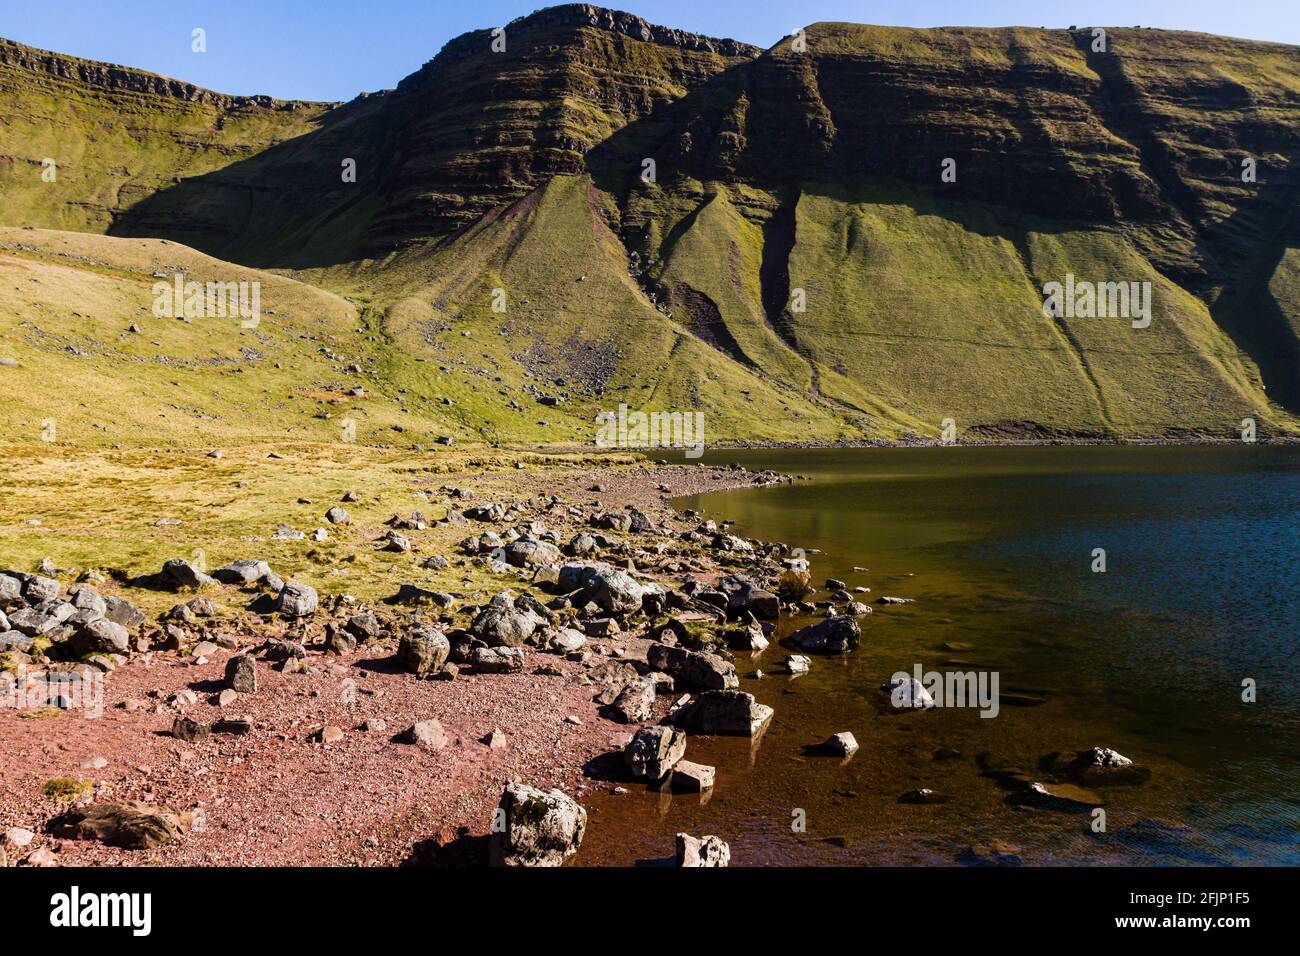 A small lake at the foot of mountains in the Brecon Beacons (Llyn y Fan Fach, Wales, UK) Stock Photo